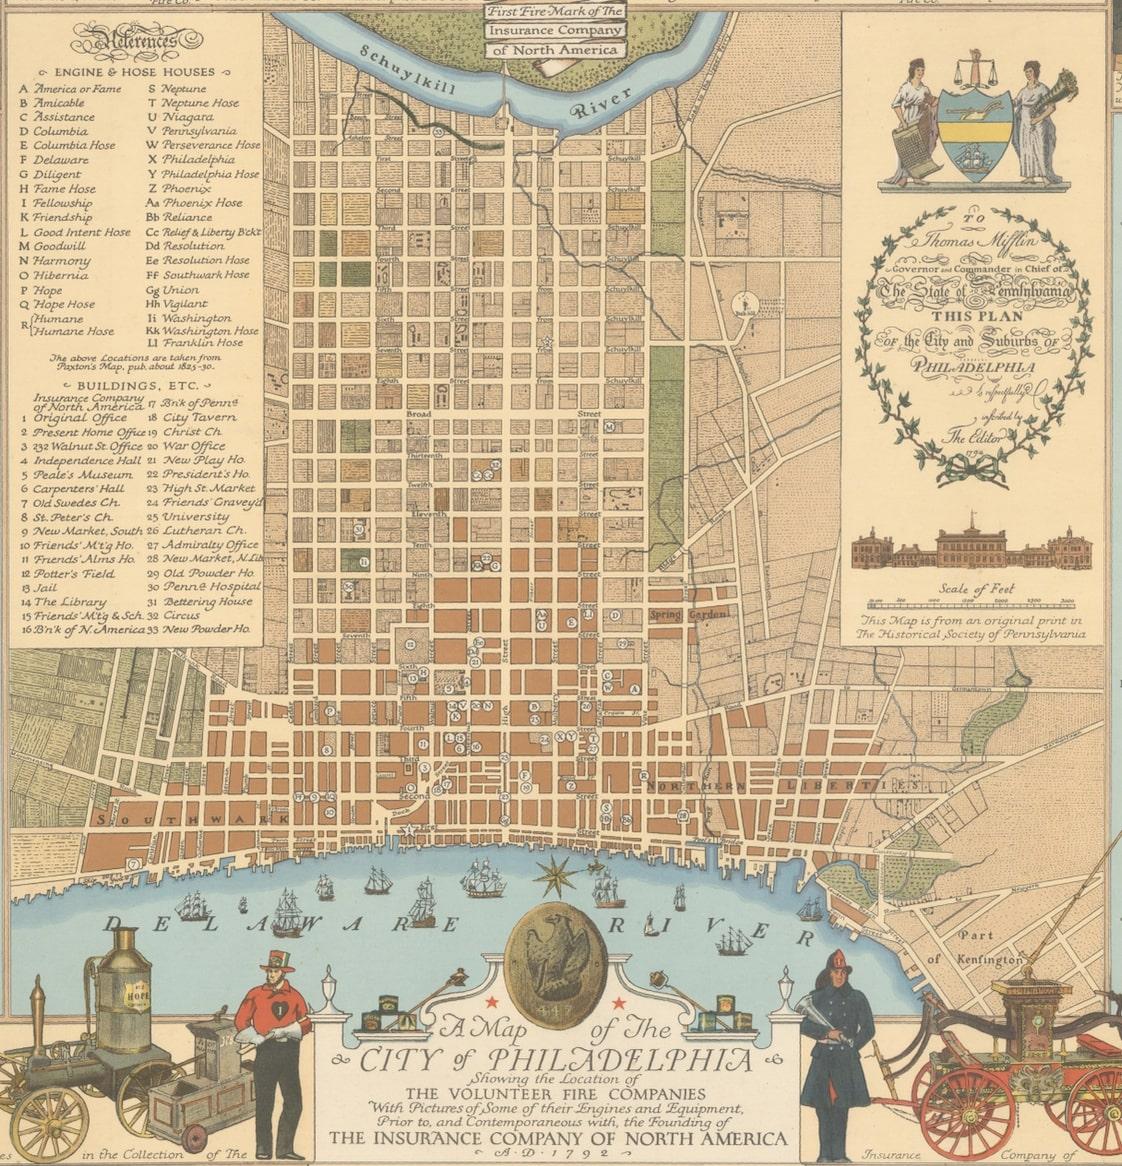 This elaborate map of Philadelphia in Pennsylvania served as a historical tribute to the city's first volunteer fire departments. It was drawn by Jacob Riegel and published by The Insurance Company of North America (INA). Founded in 1792, the INA is